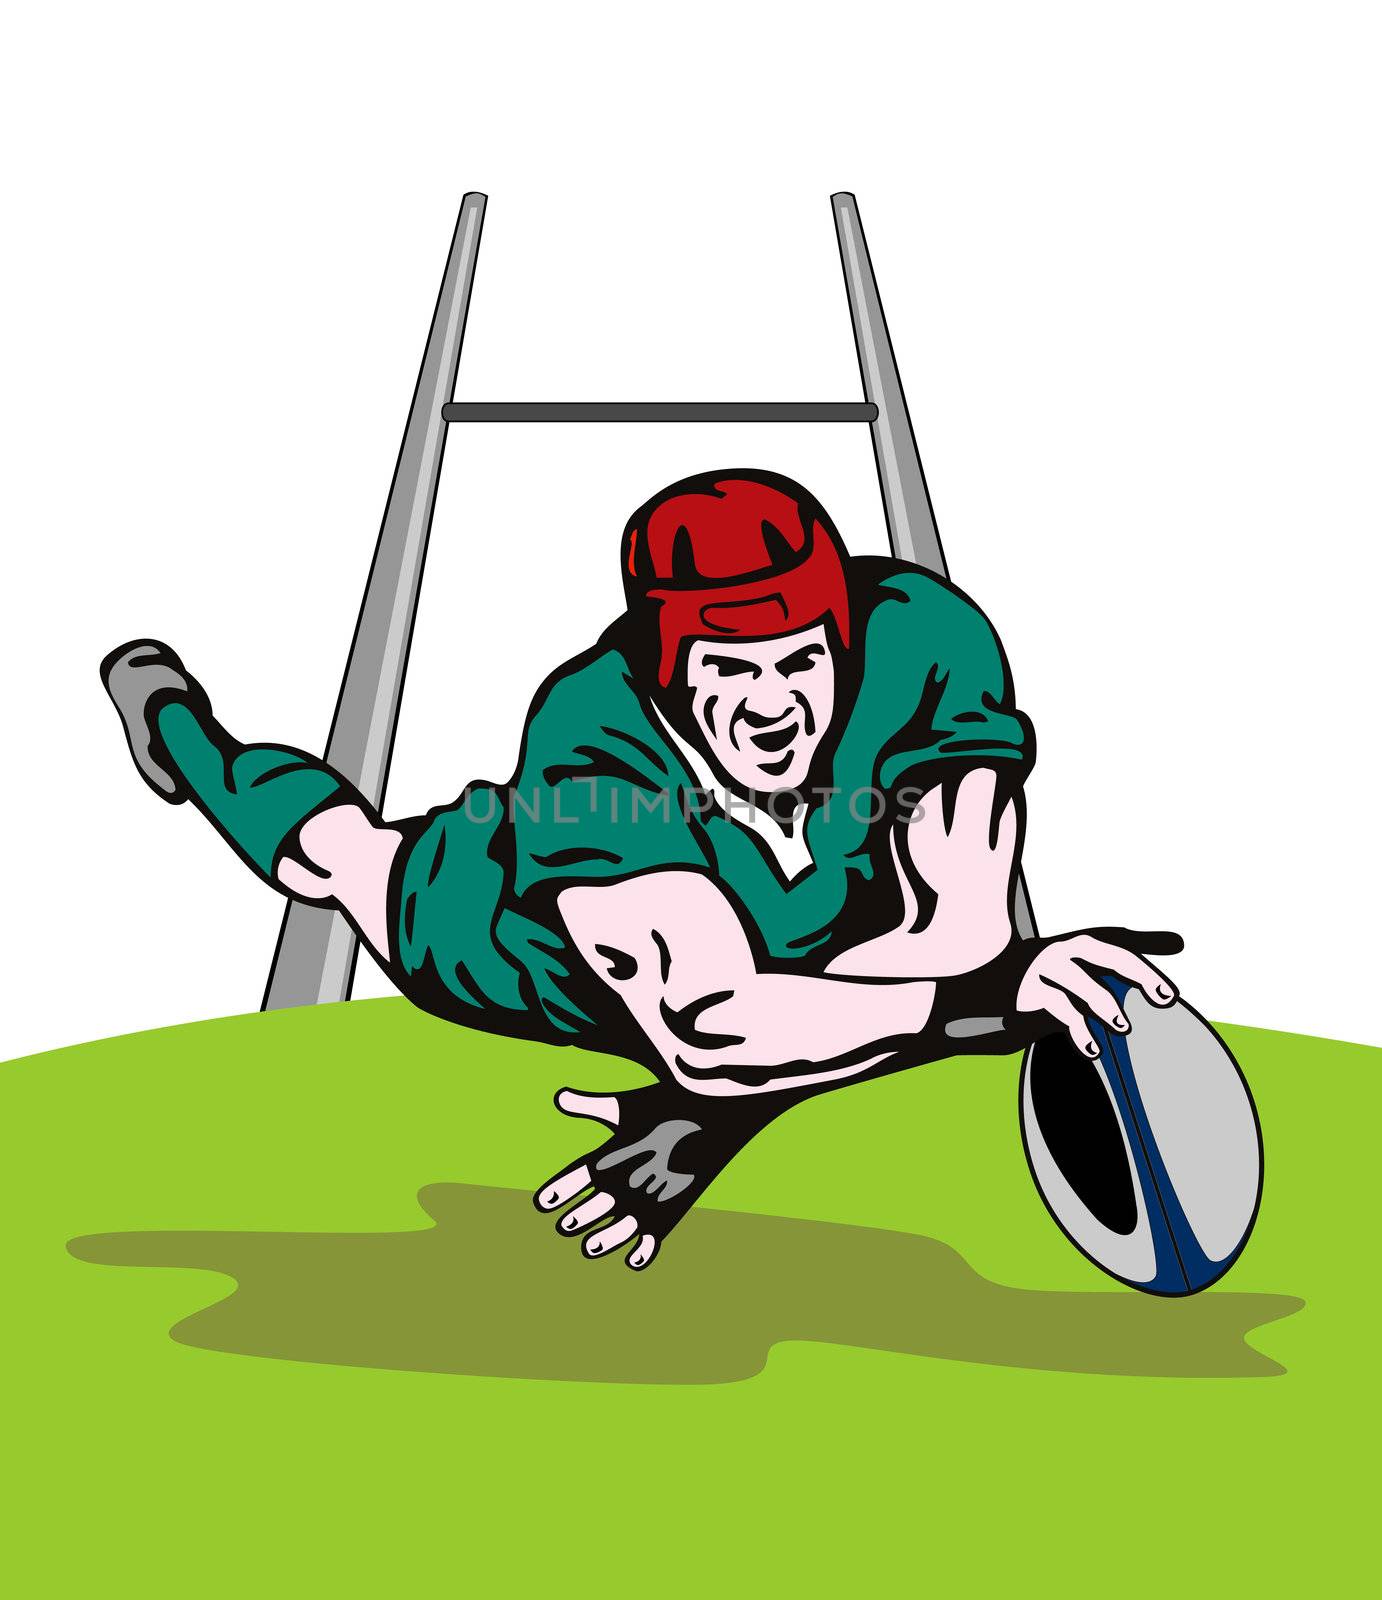 illustration of a rugby player scoring a try on isolated background  with goal post